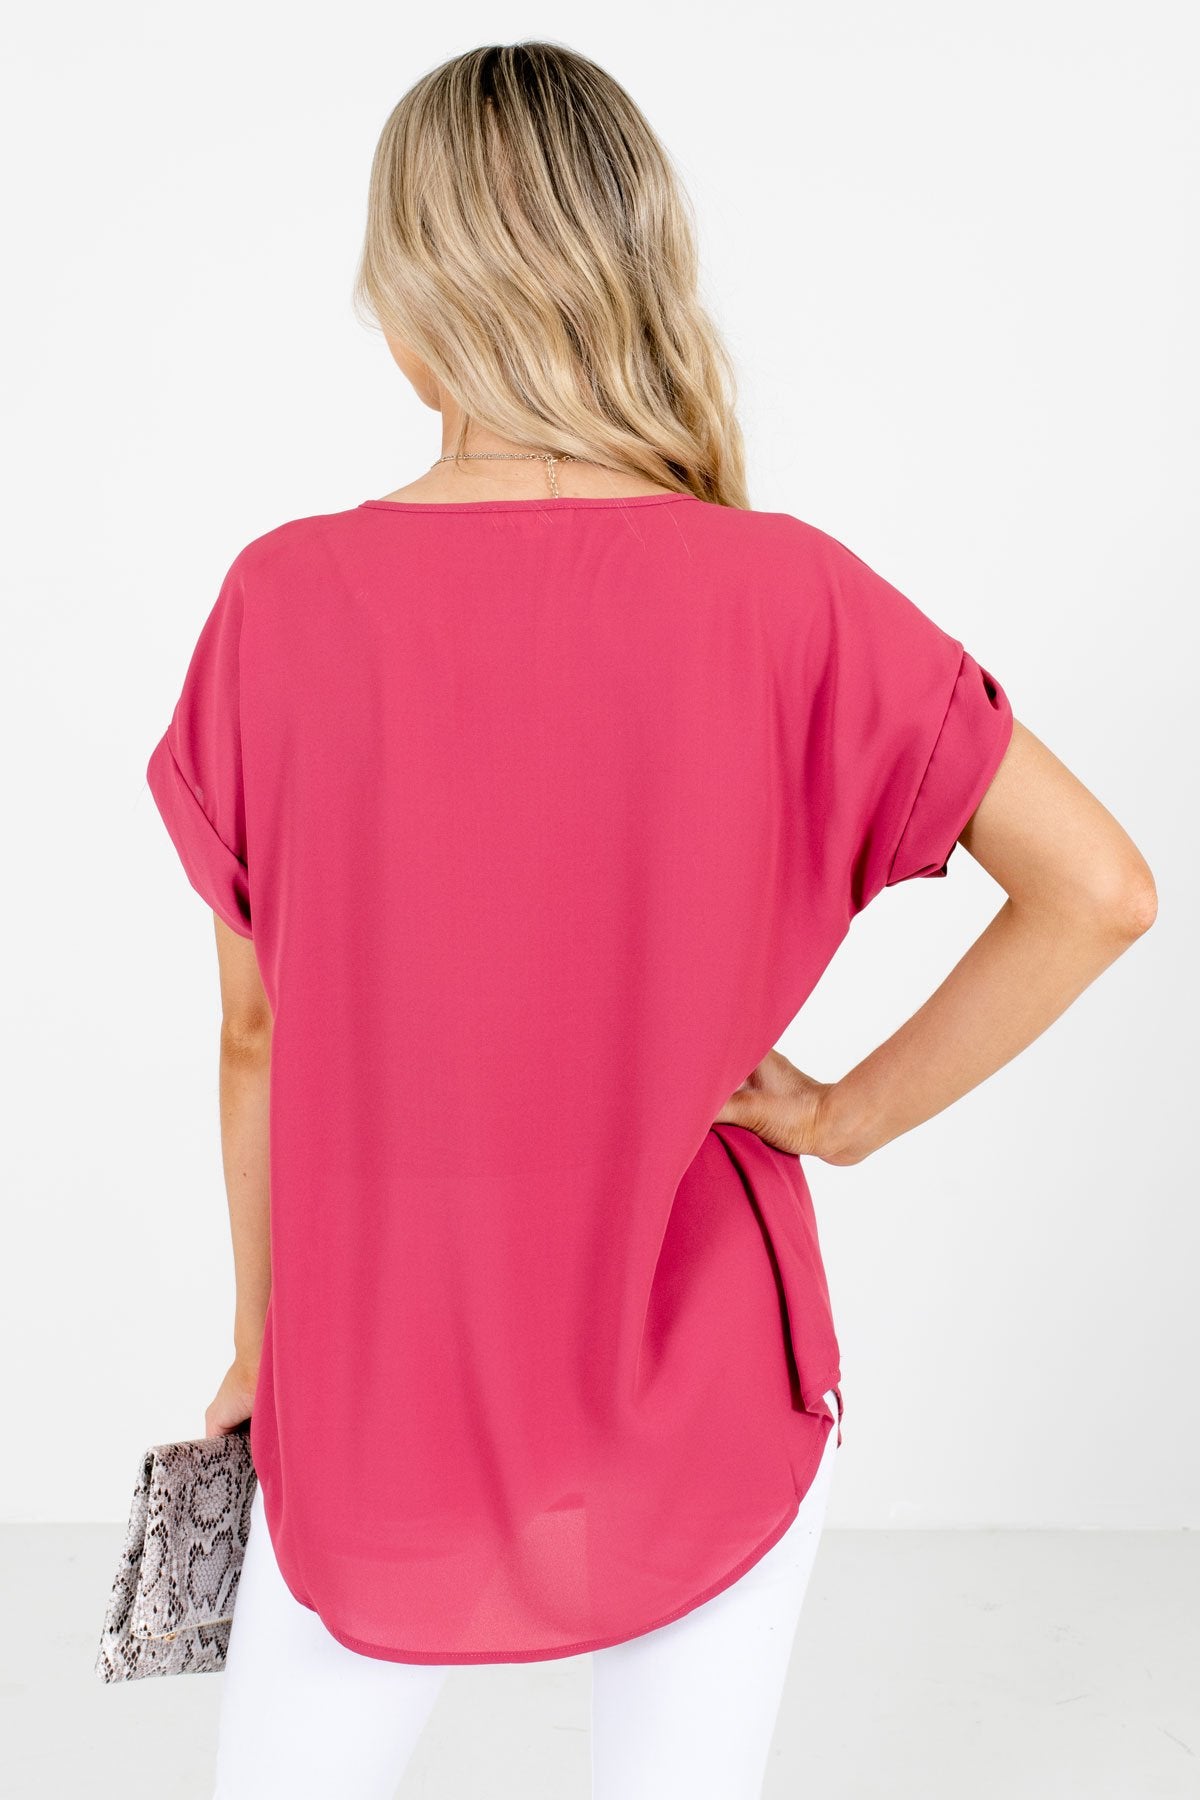 Women’s Rose Pink Cuffed Sleeve Boutique Blouse